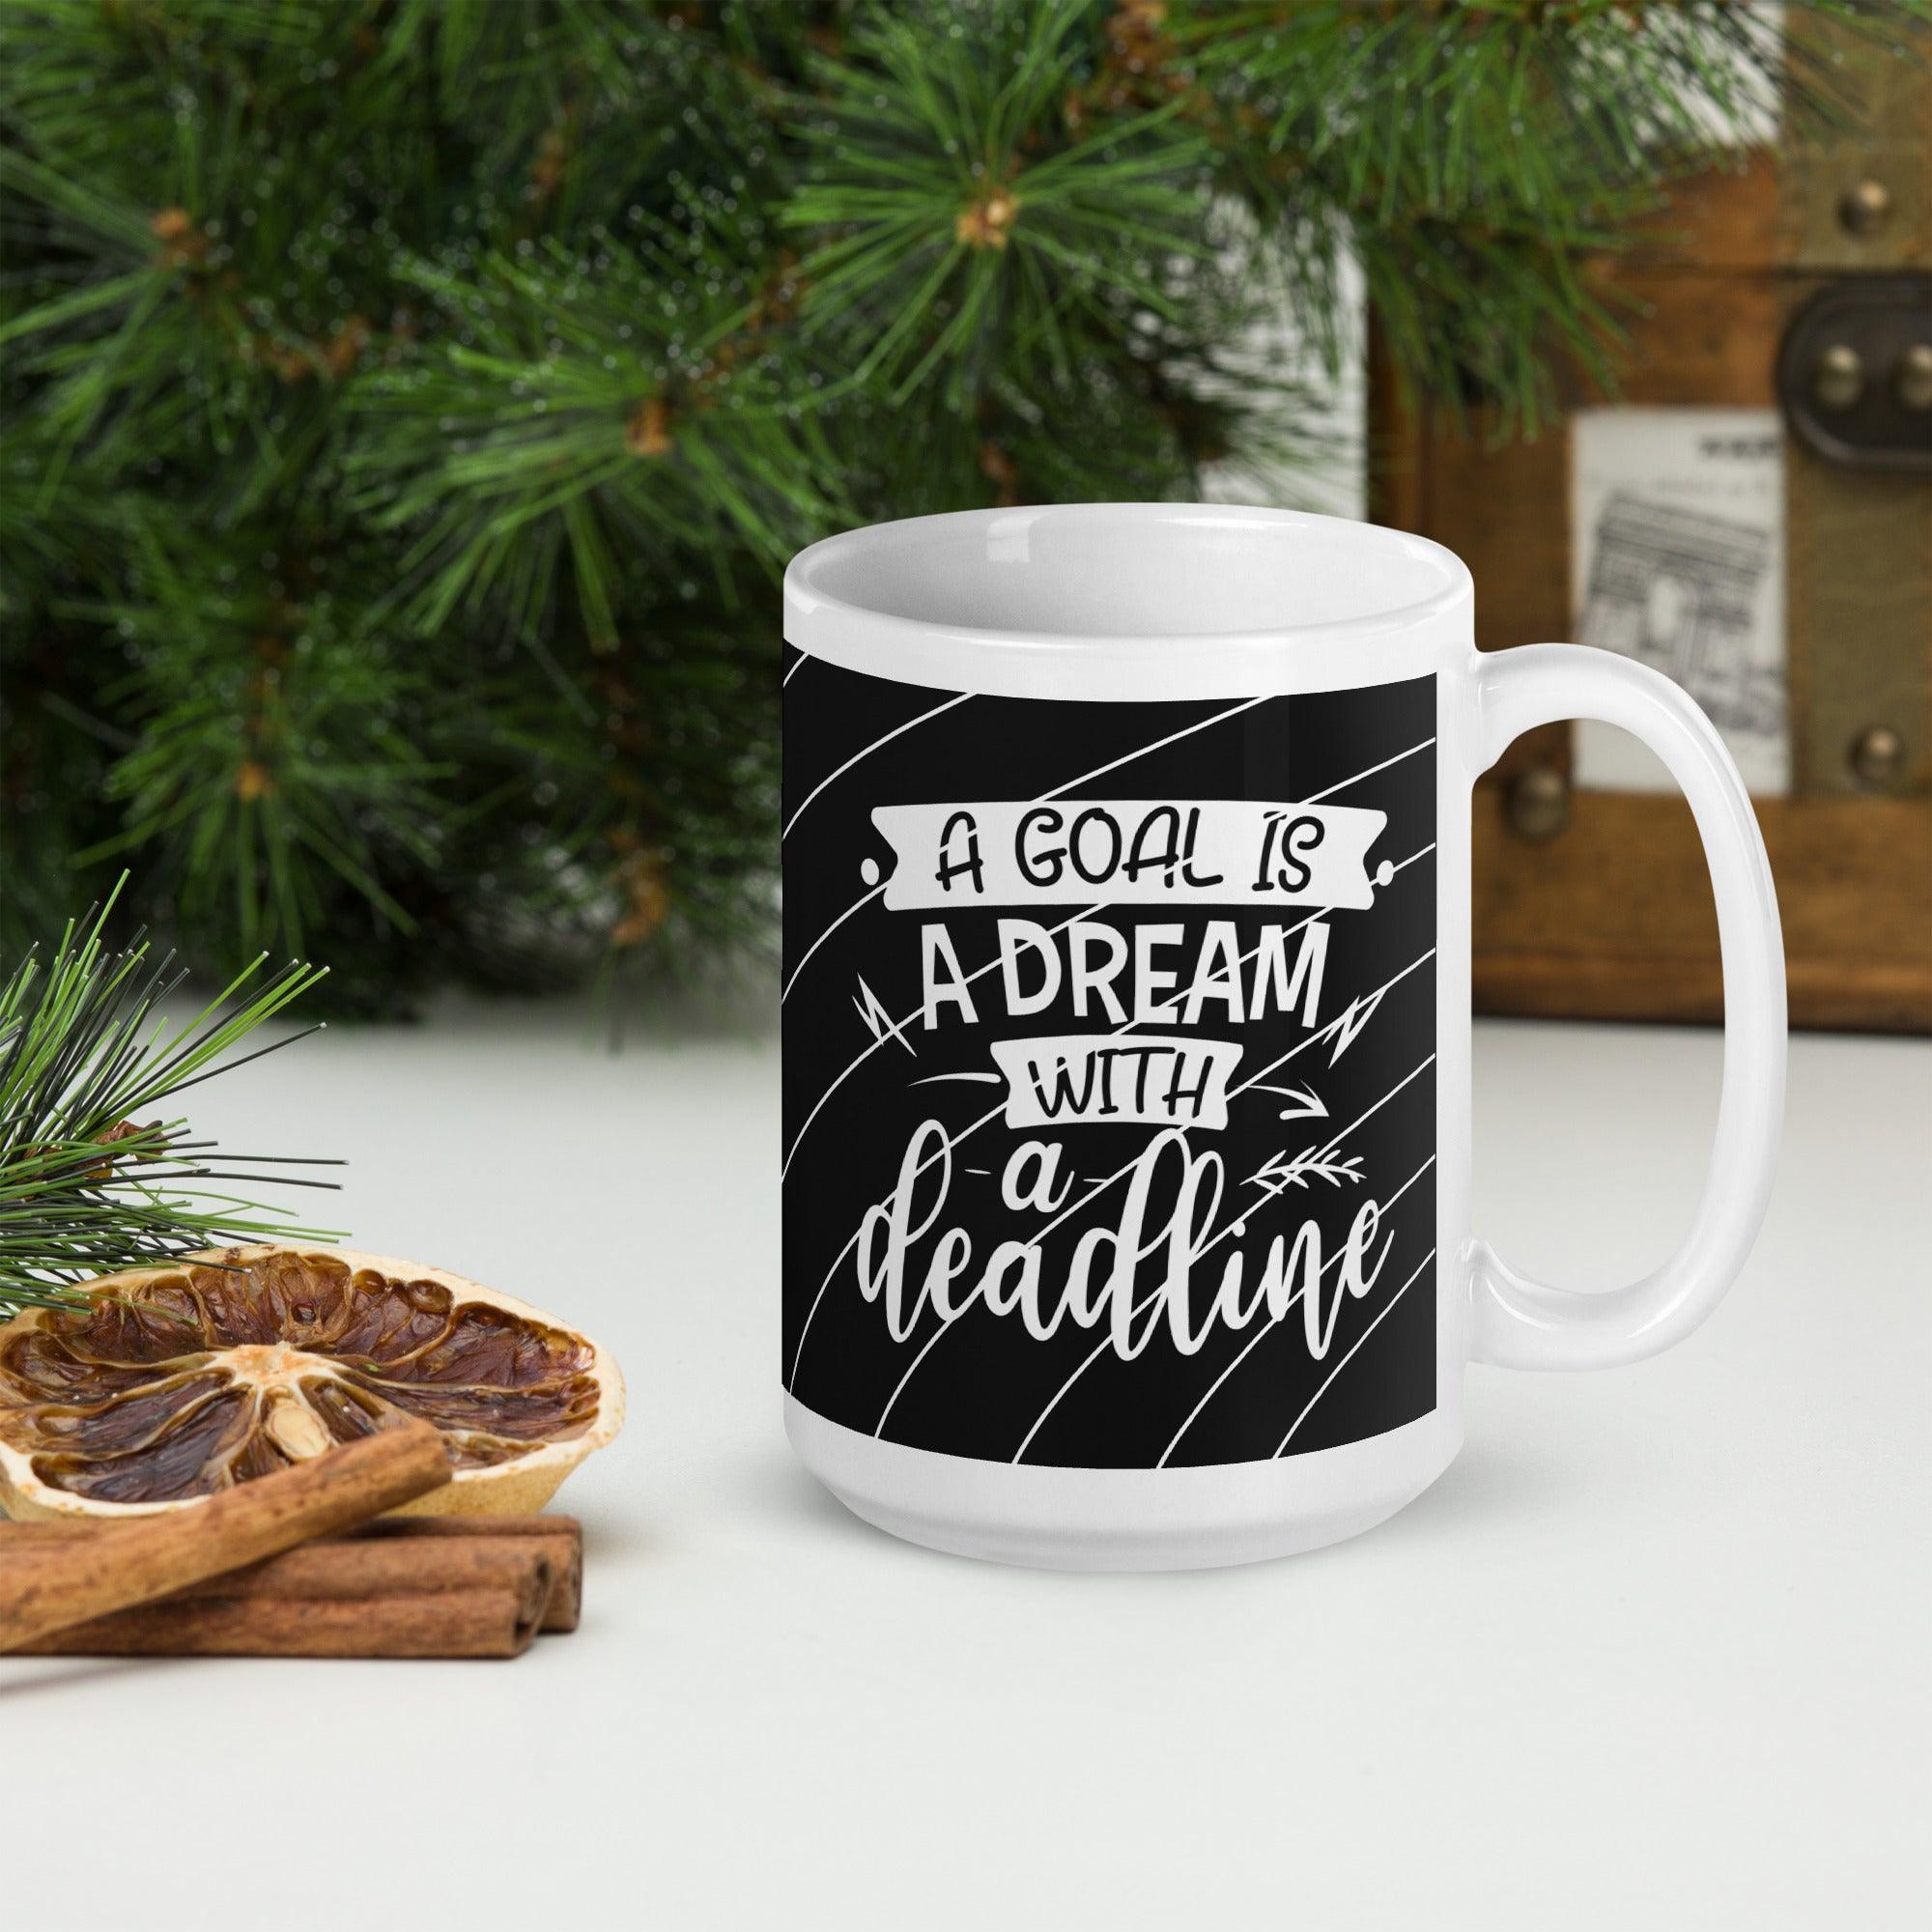 A Goal Is A Dream With A Deadline | White glossy mug - Affirm Effect